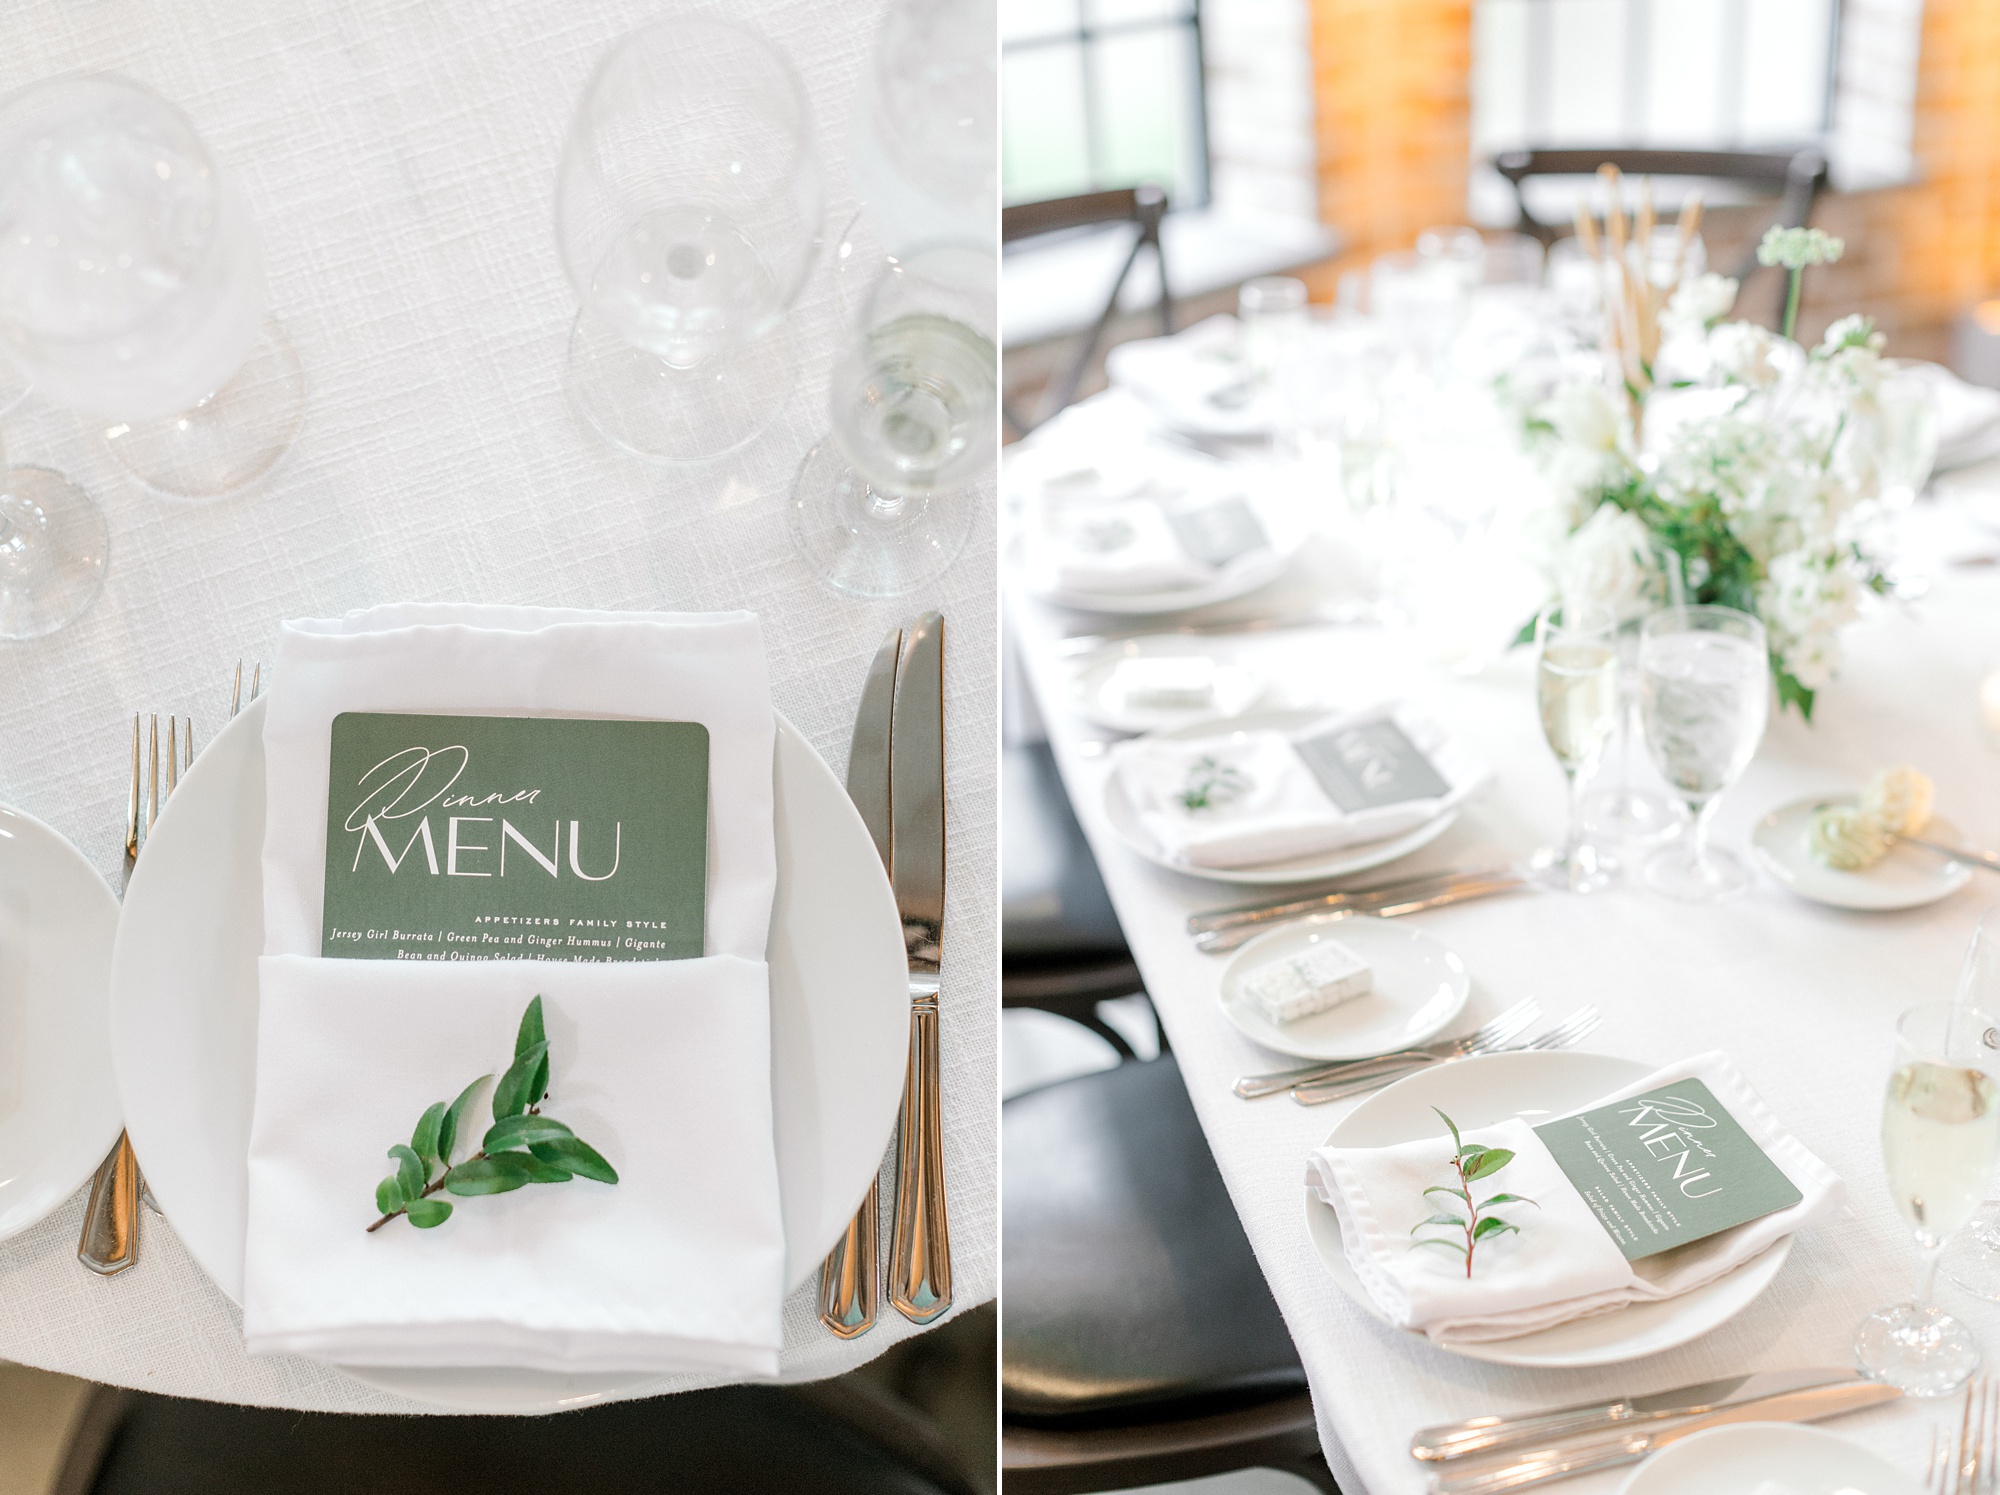 place settings with green menu cards and sprigs of greenery